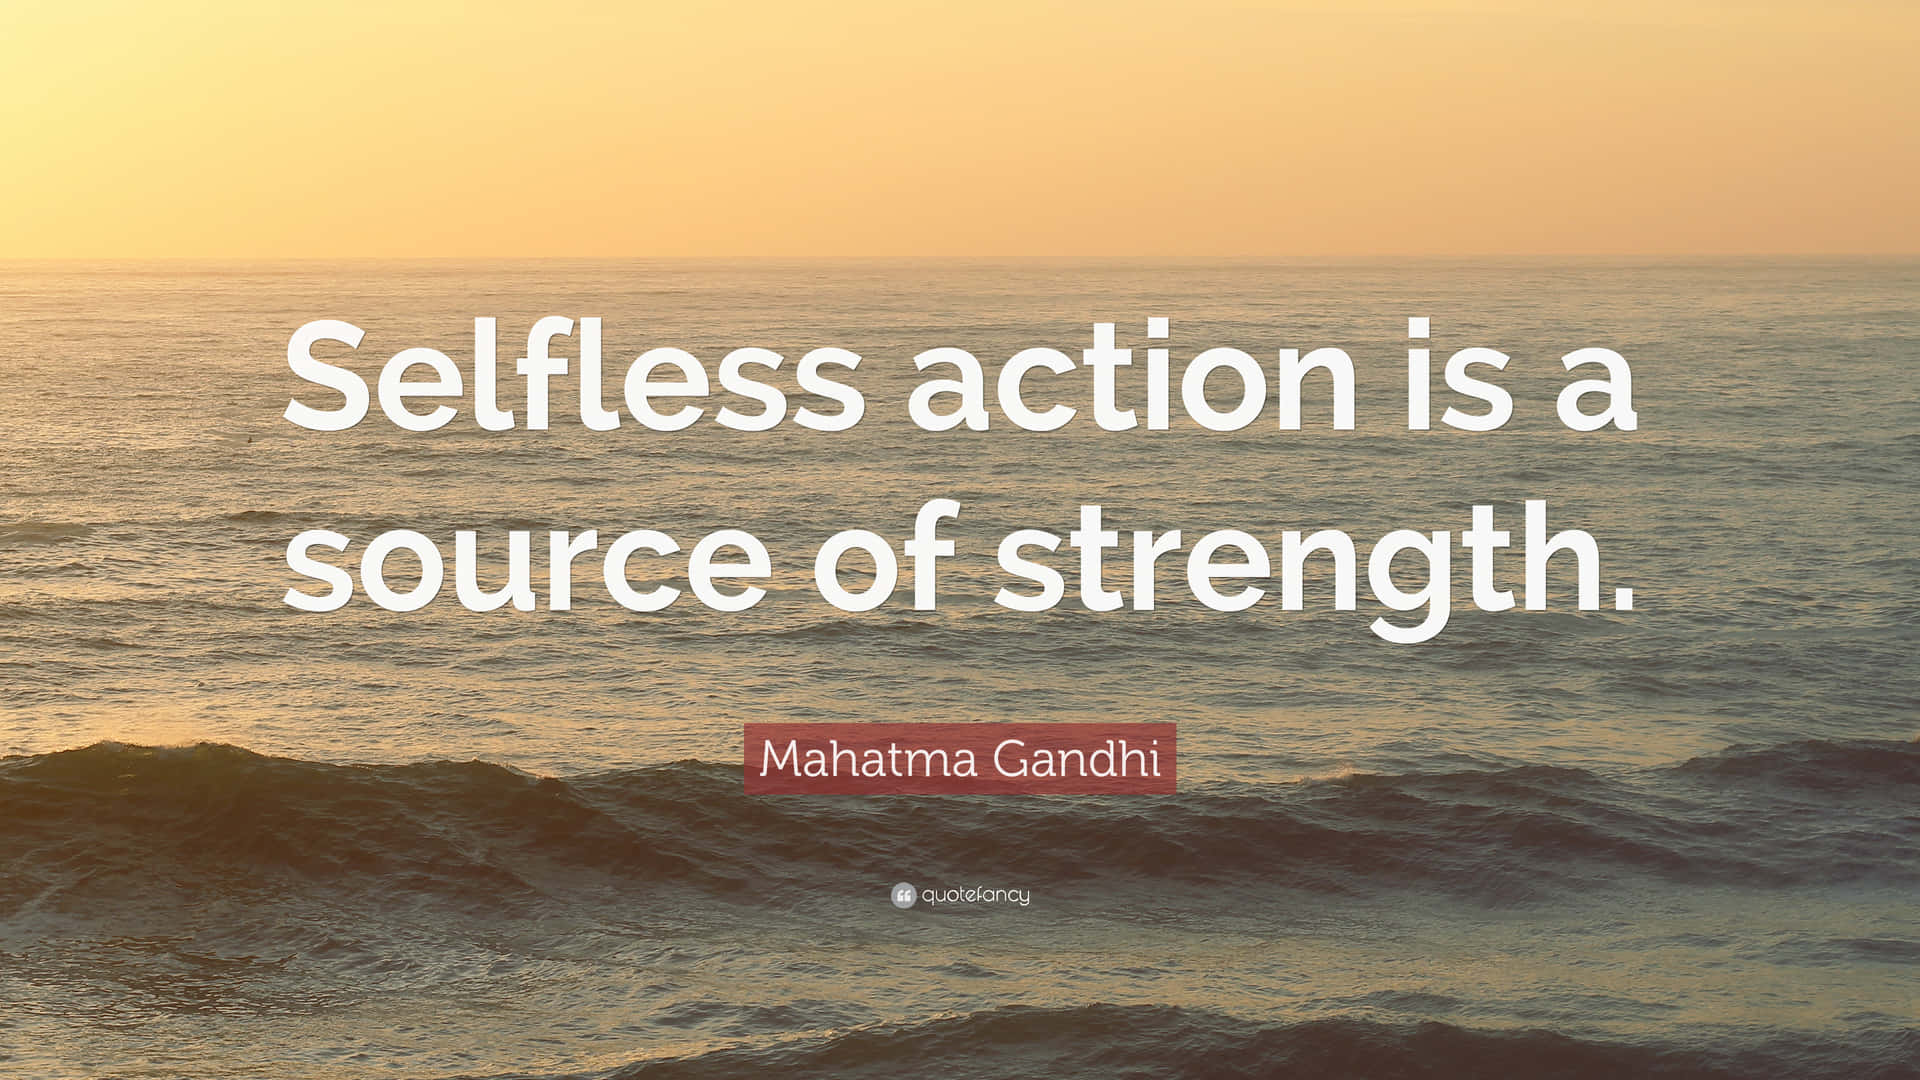 Selfless Action Quote By Mahatma Gandhi Wallpaper